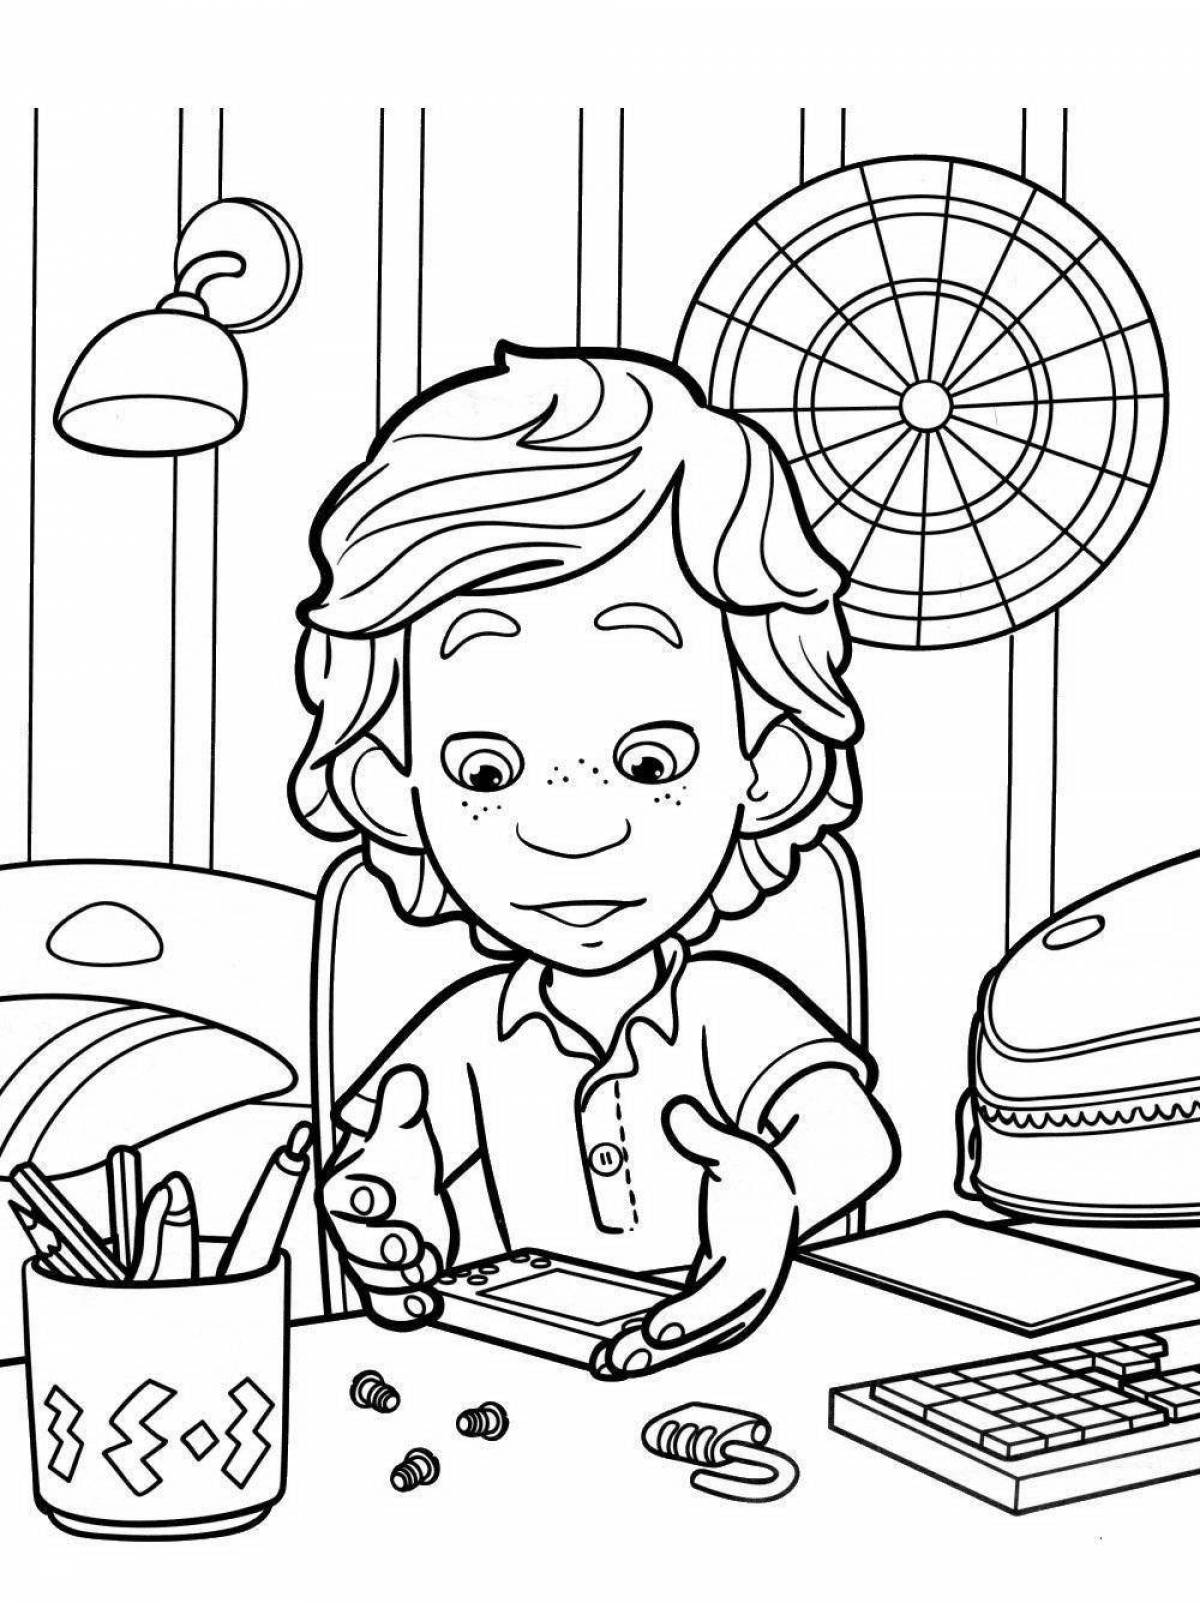 Radiant coloring page fixay